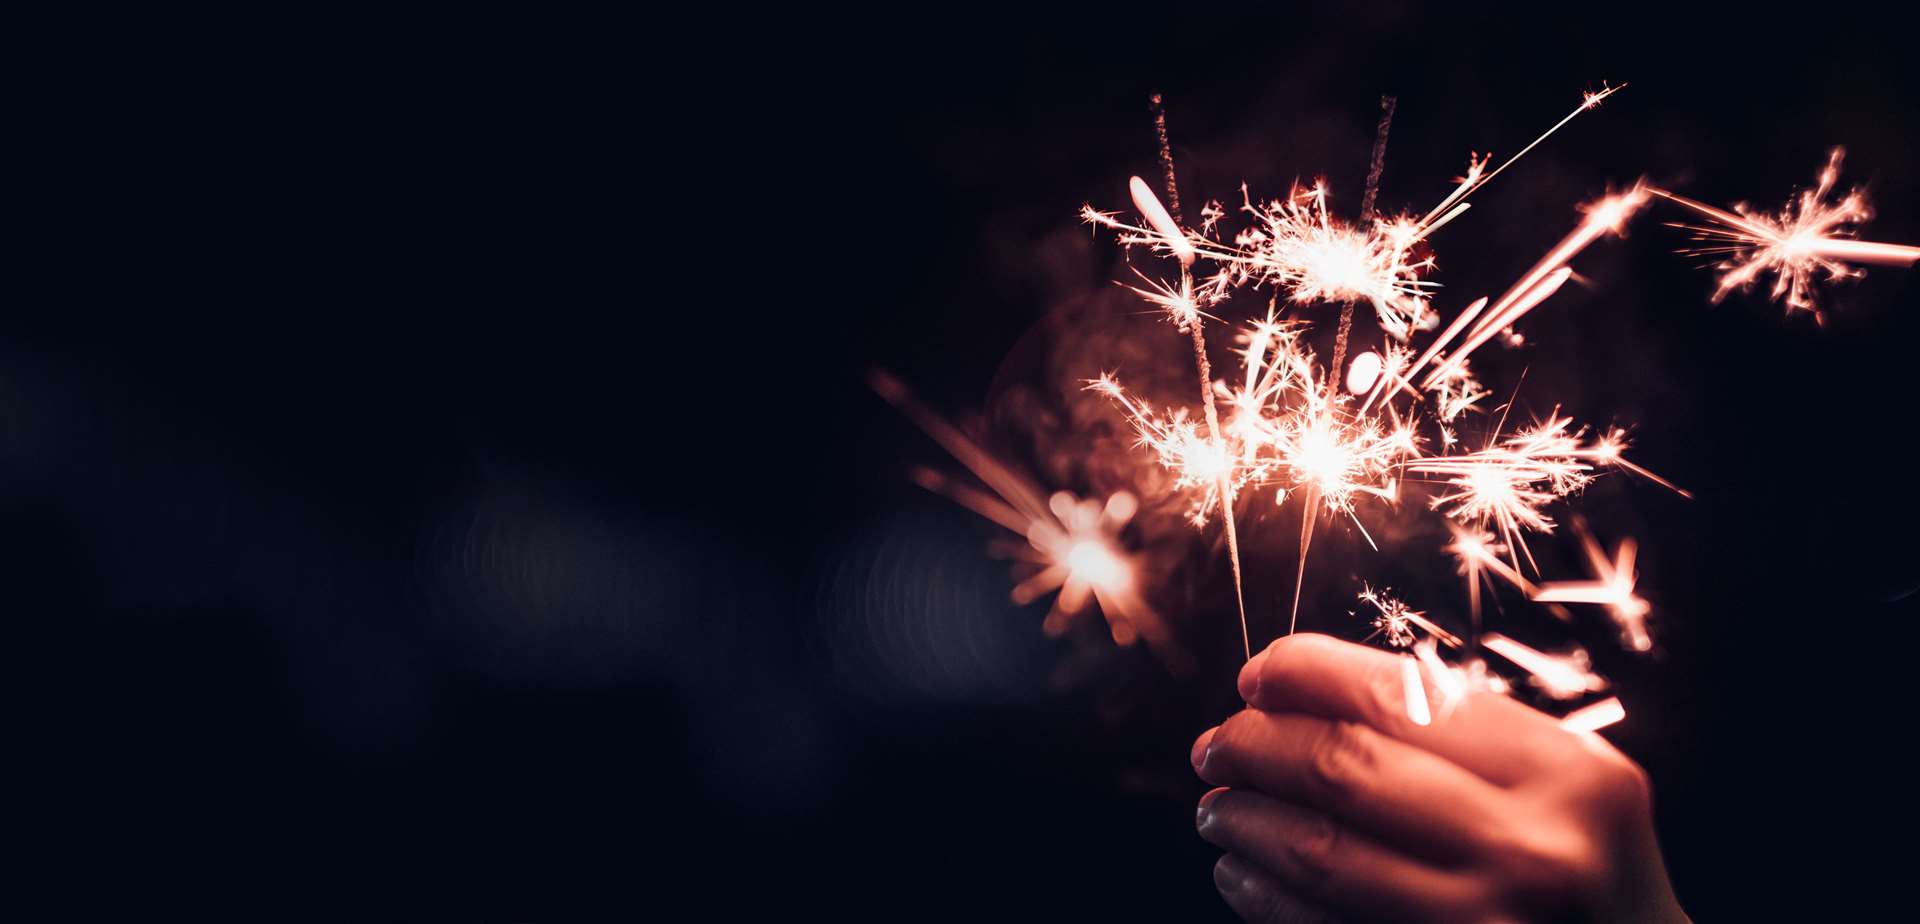 Used irresponsibly, fireworks can cause damage to property and do significant harm to people and animals. Not only is there a danger from fireworks exploding, they can also pose a serious fire risk as well.